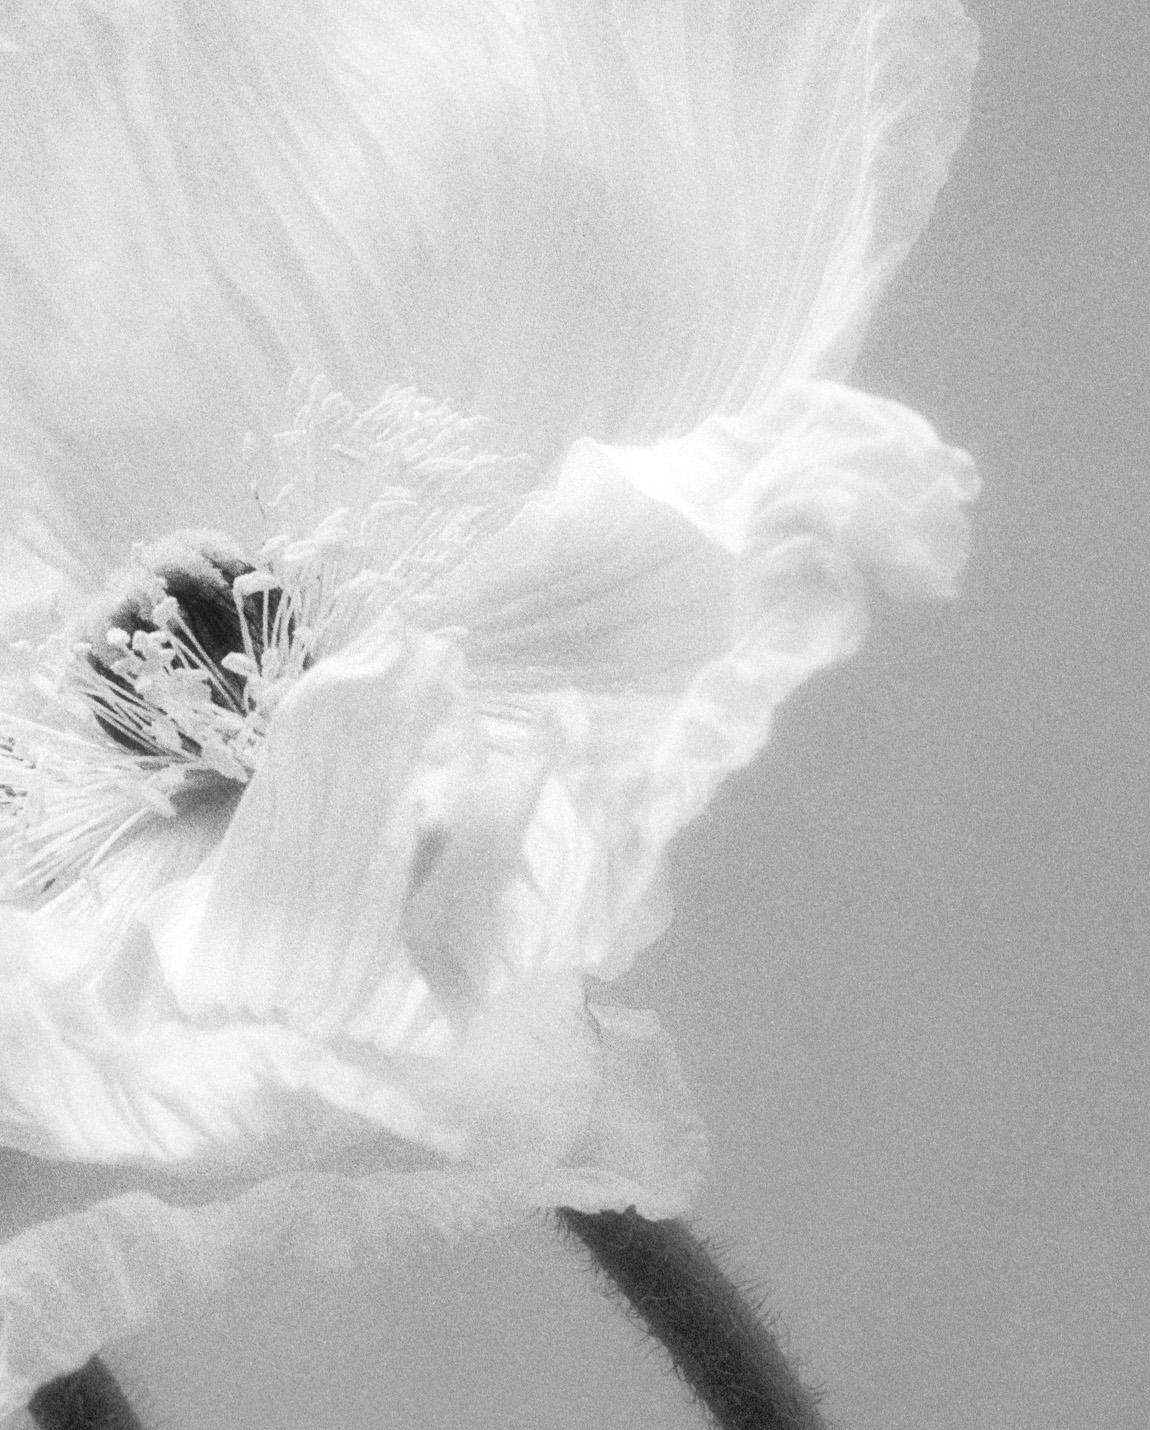 Coupled Poppies - analogue black and white floral photography - Photograph by Ugne Pouwell